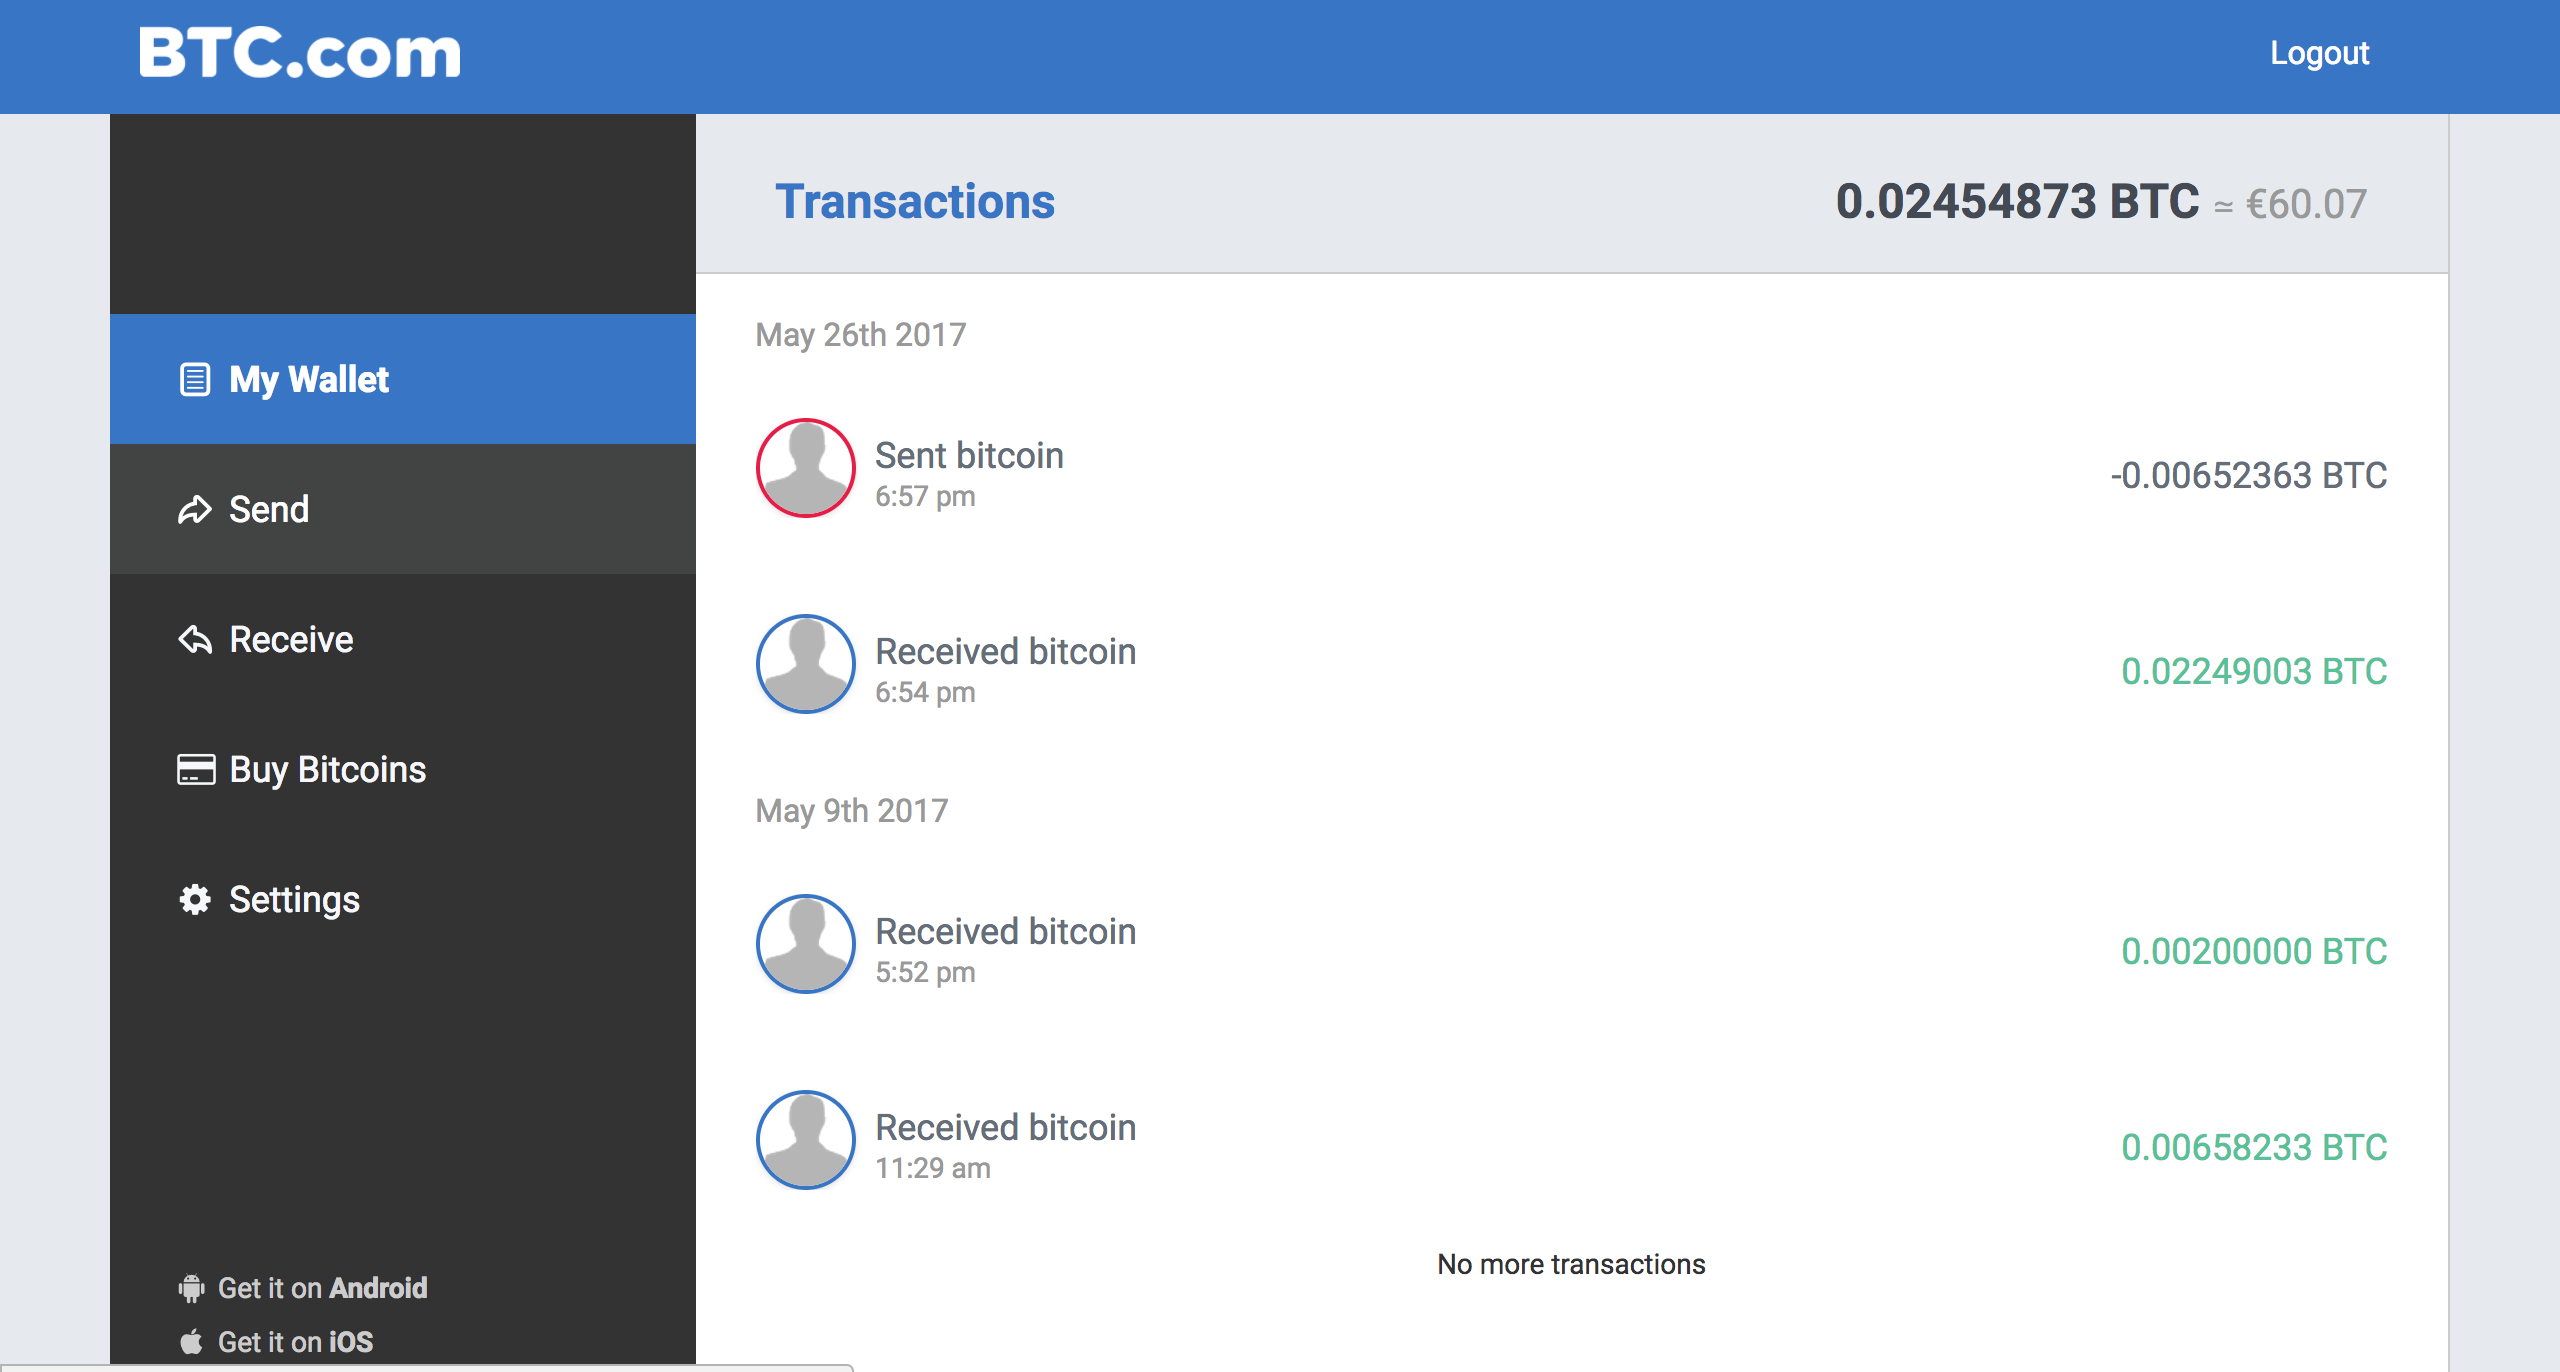 how to buy bitcoin for btc wallet